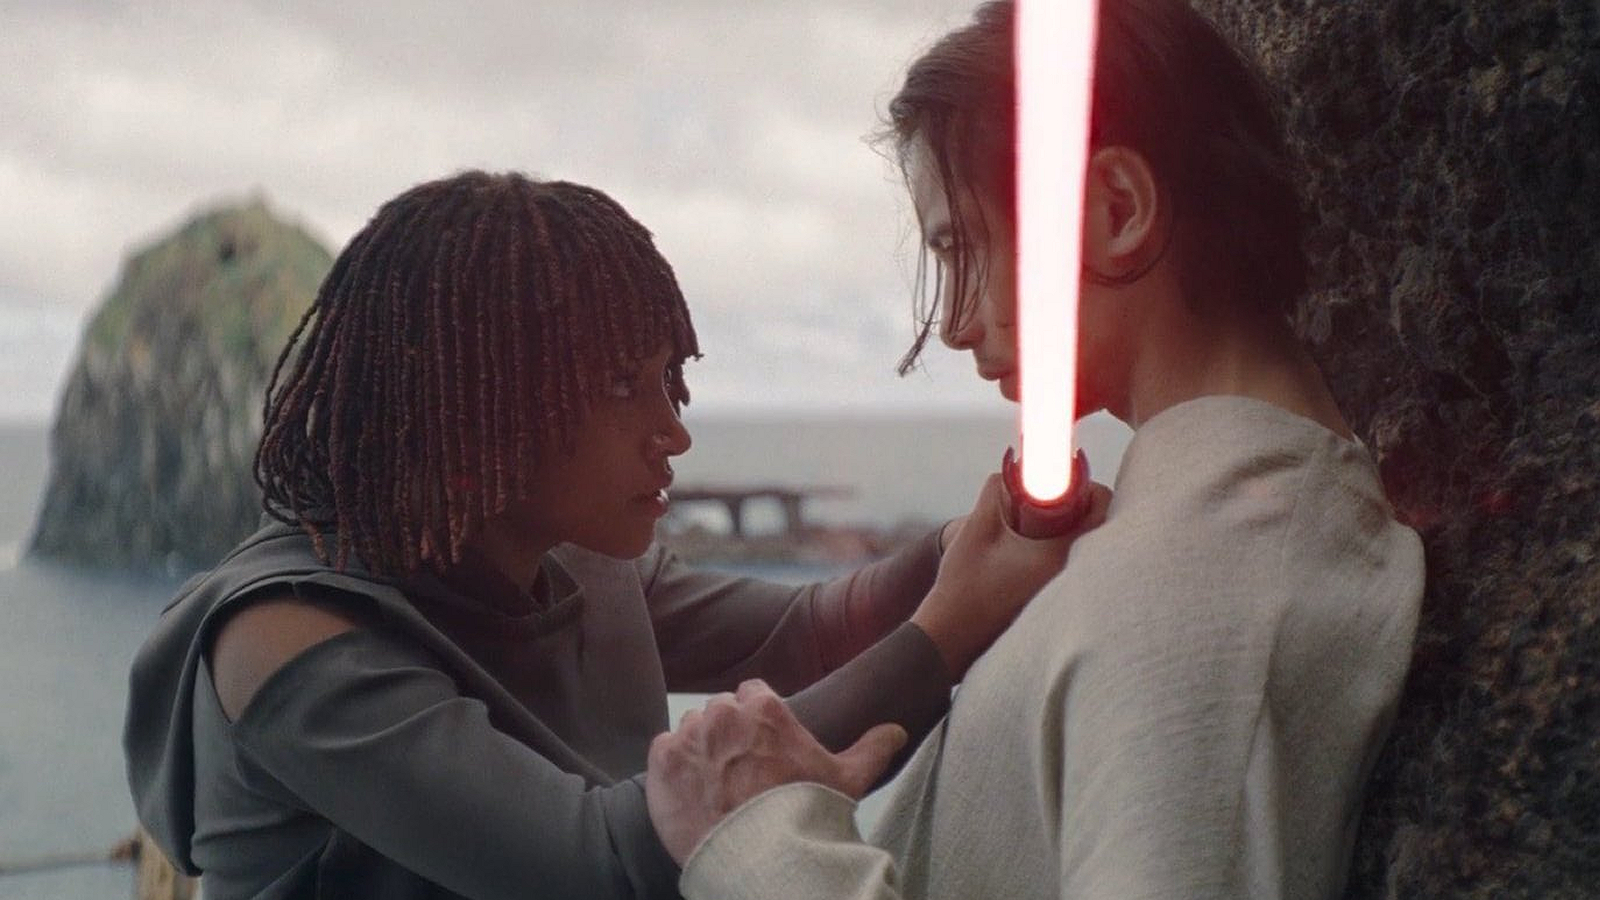 Osha holds a lightsaber to Qimir/The Stranger's neck in The Acolyte Season 1, Episode 6